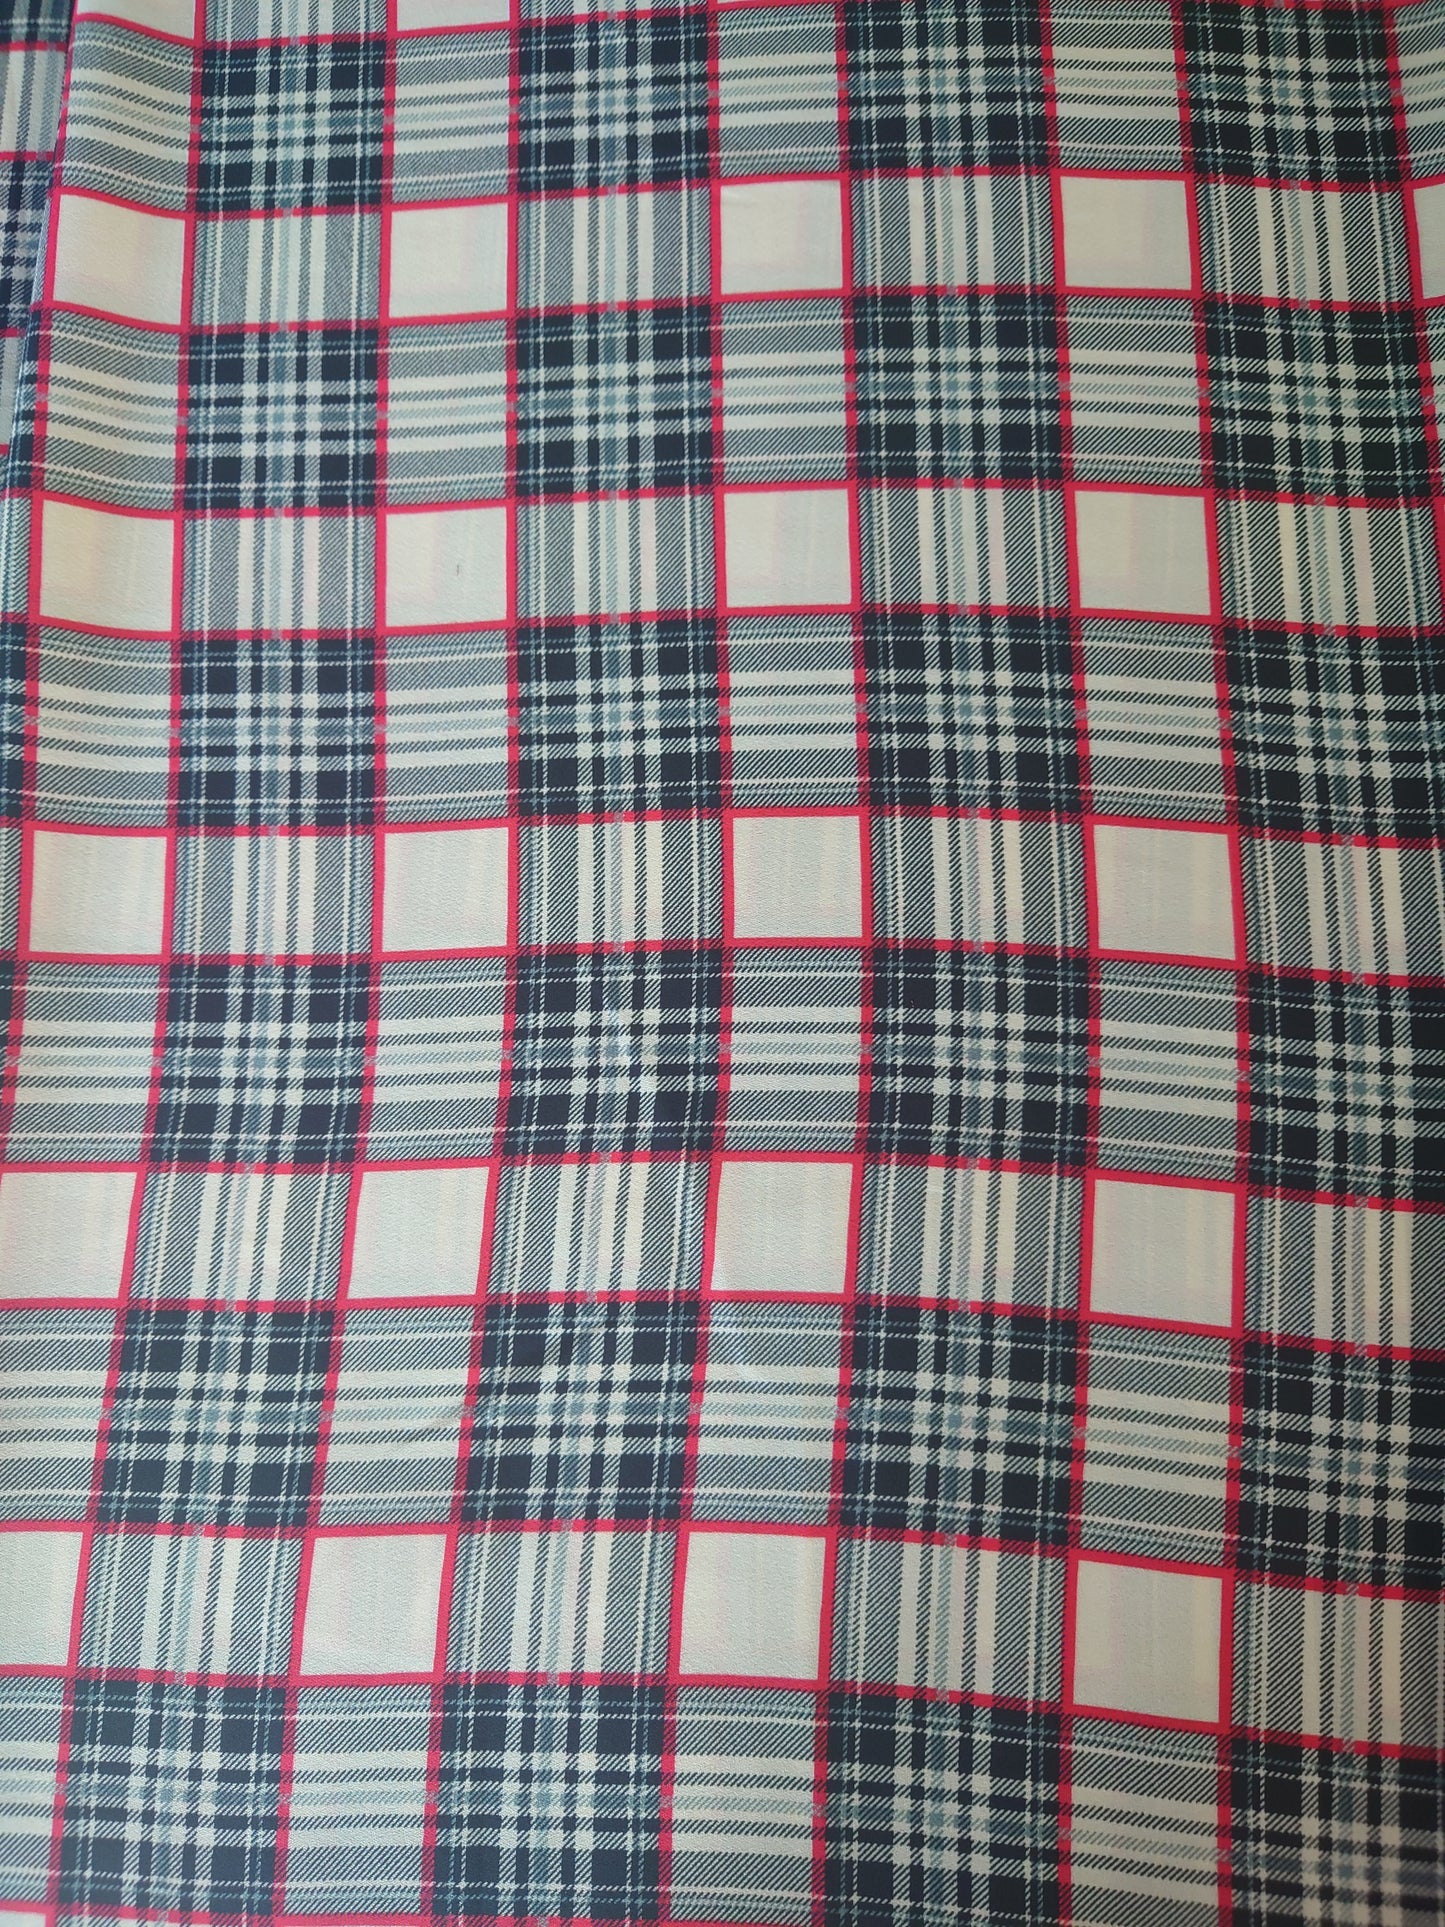 Tartan red check crepe de chine 3m for £15